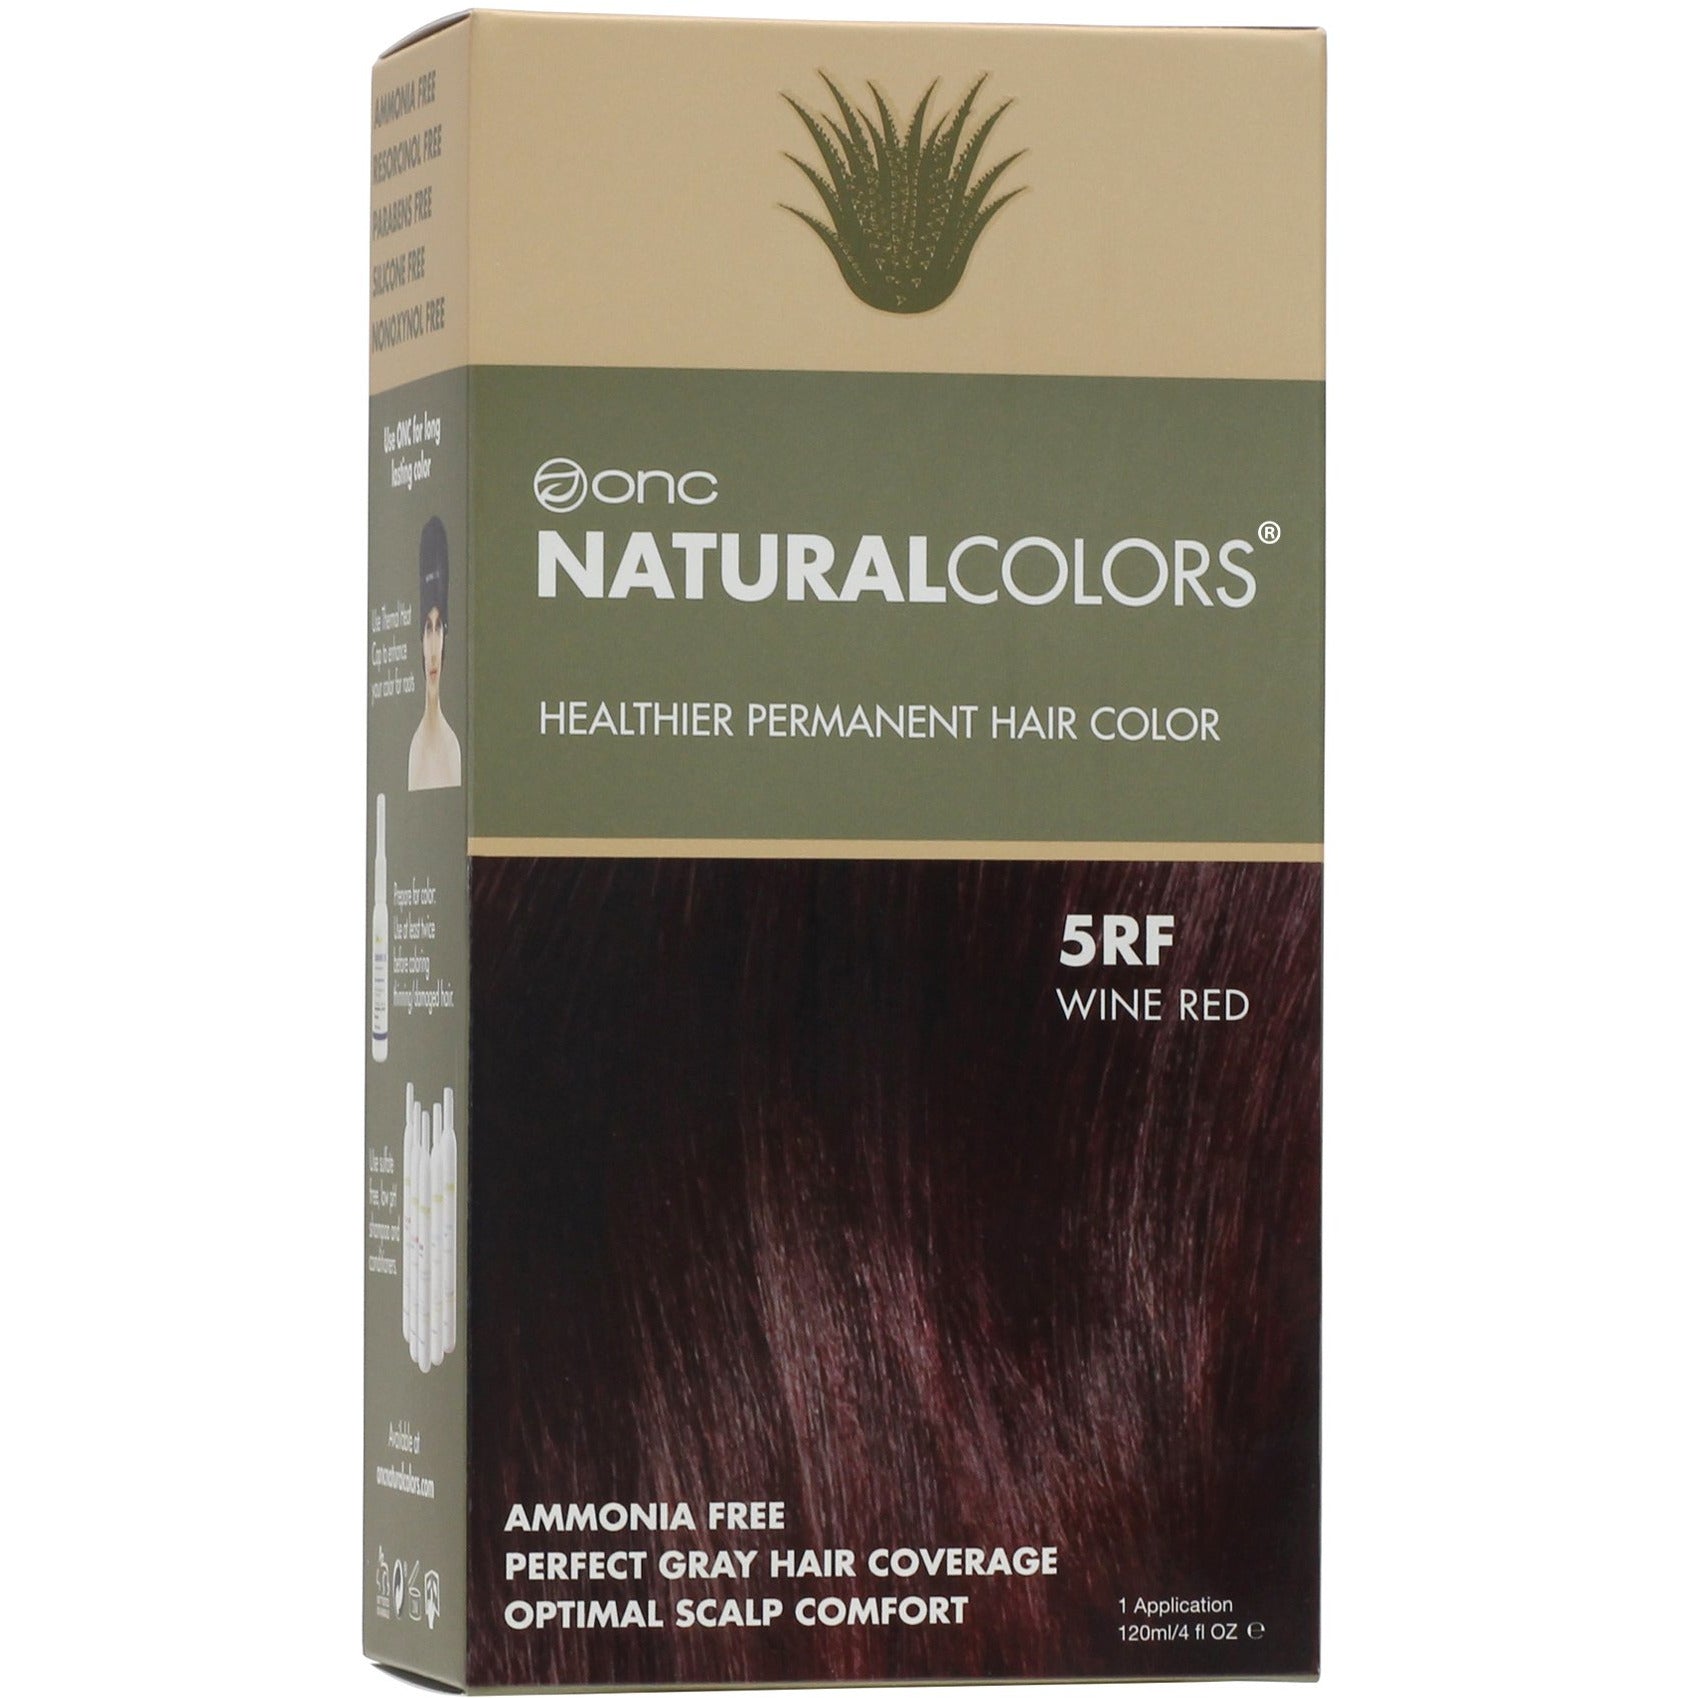 5RF Wine Red Heat Activated Hair Dye With Organic Ingredients - 120 ml (4 fl. oz)